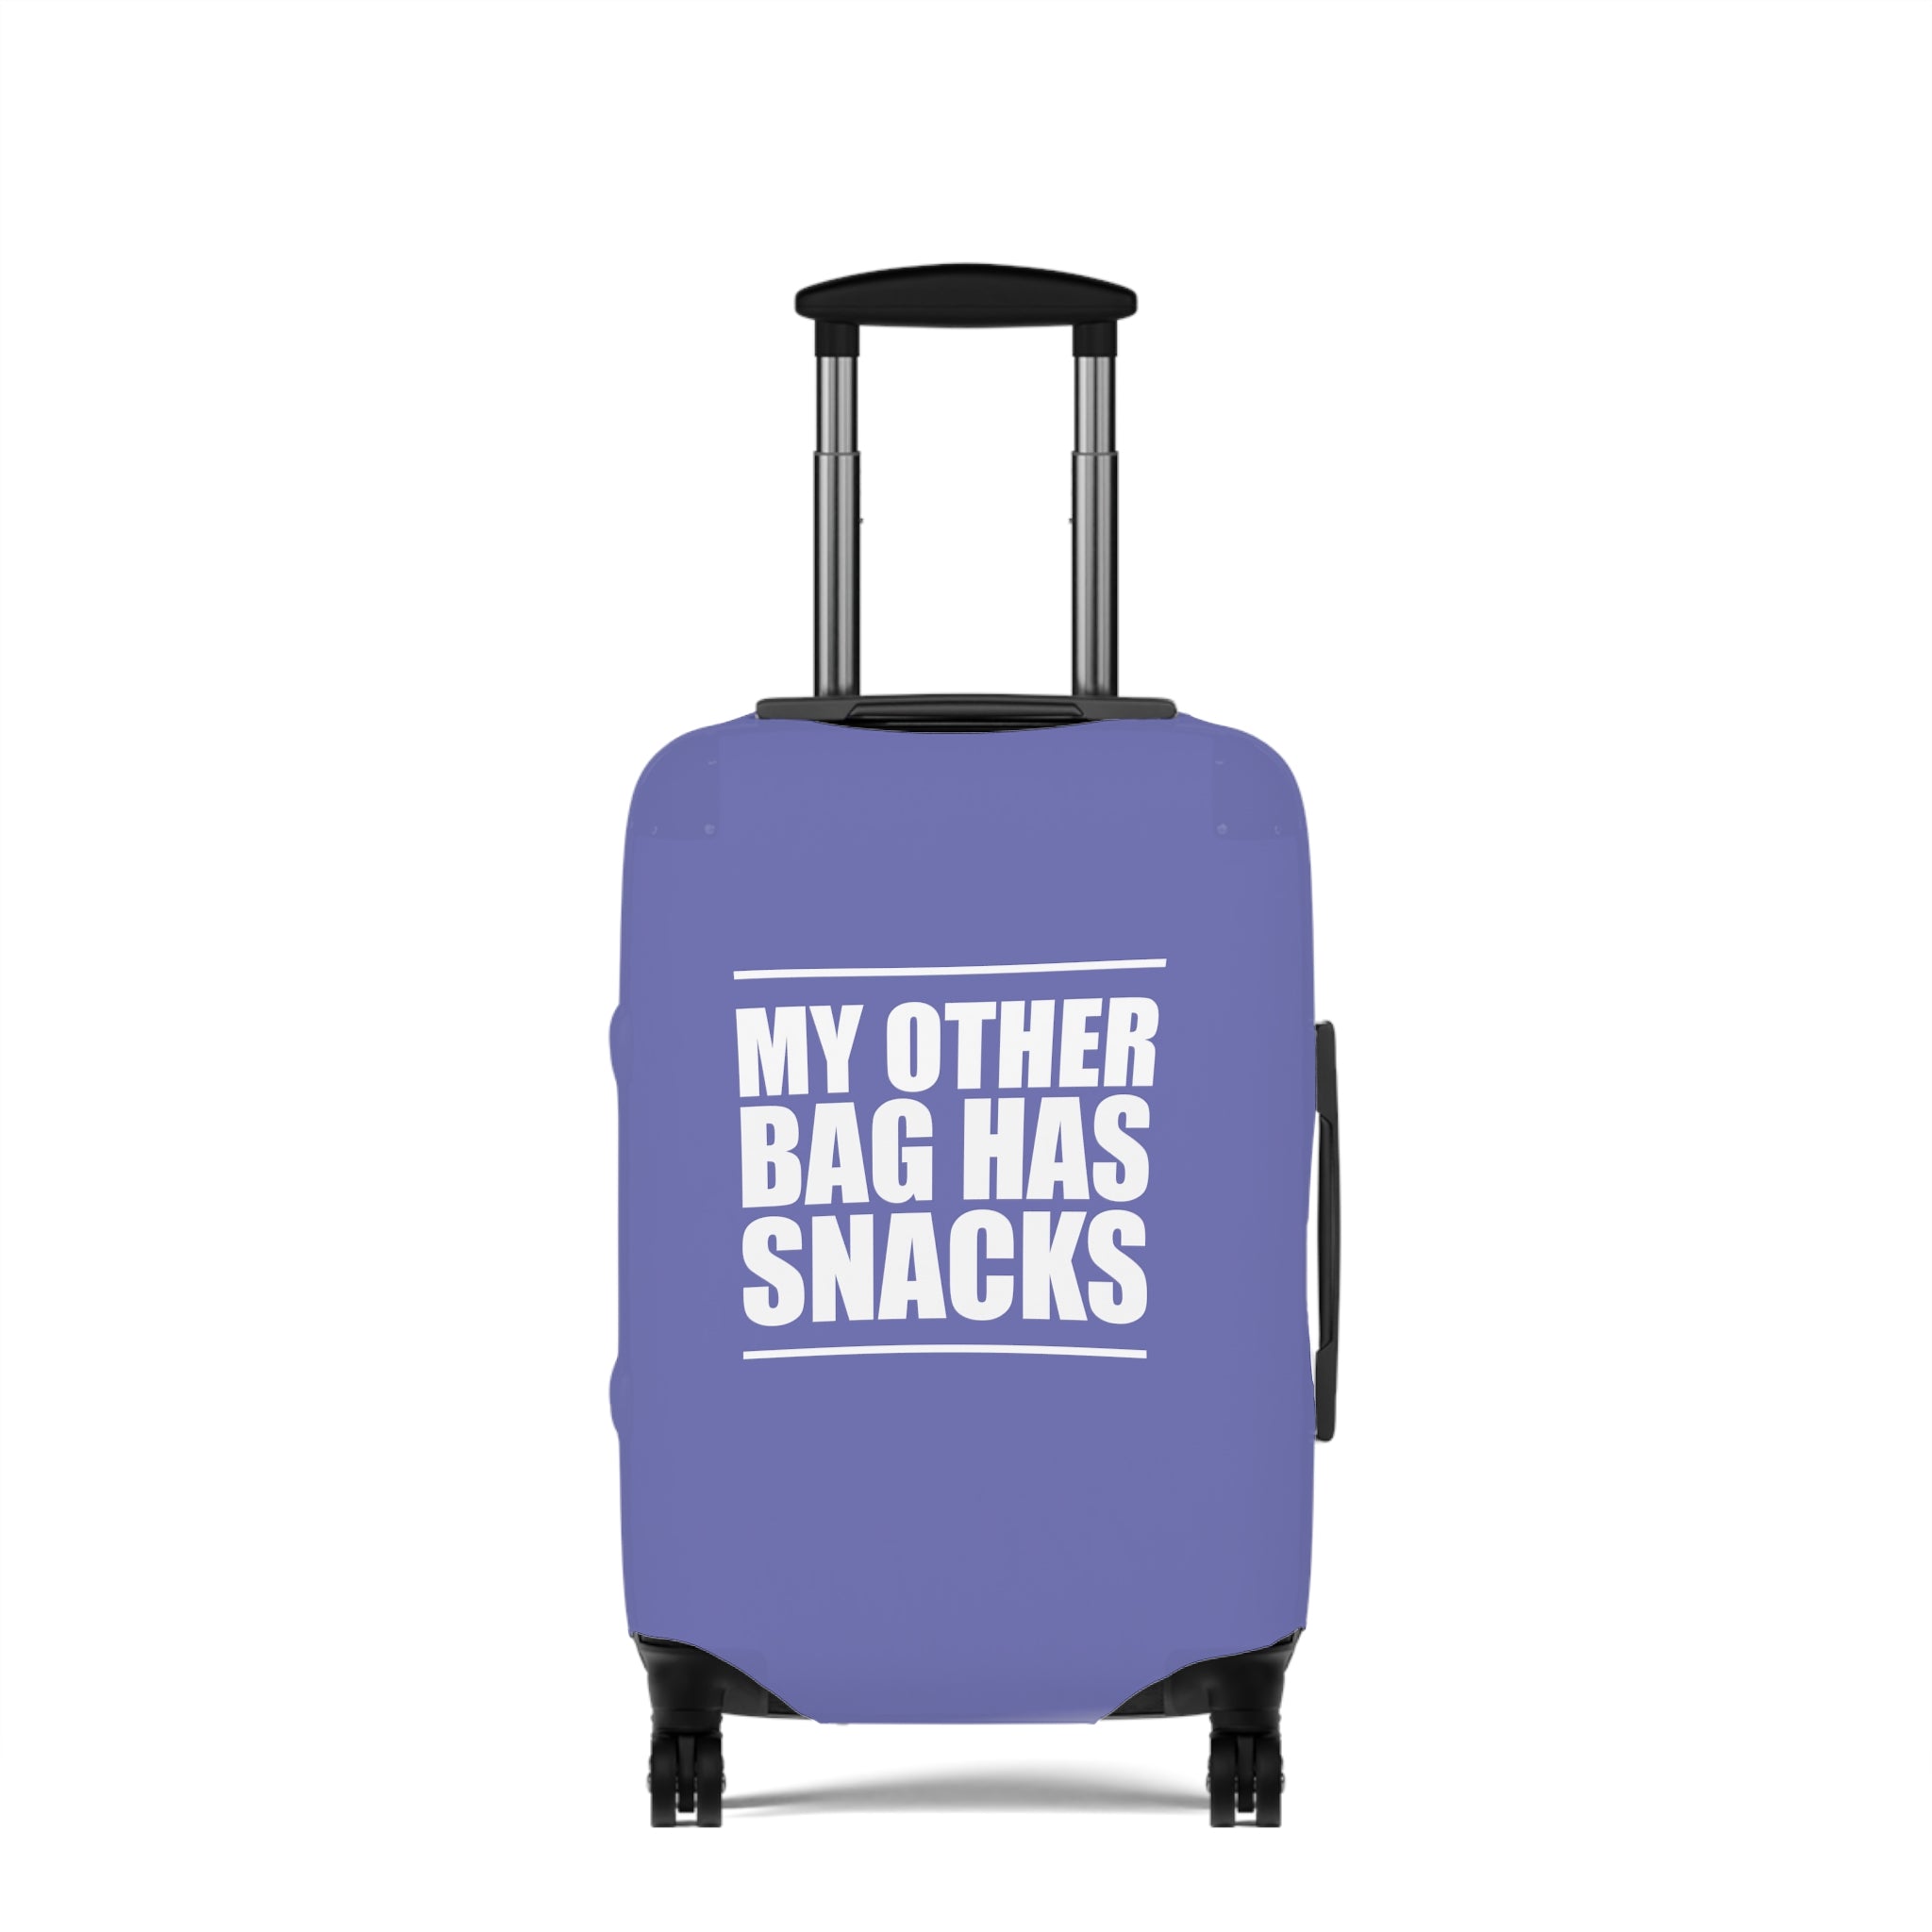 My other bag has snacks Luggage Cover (Purple)